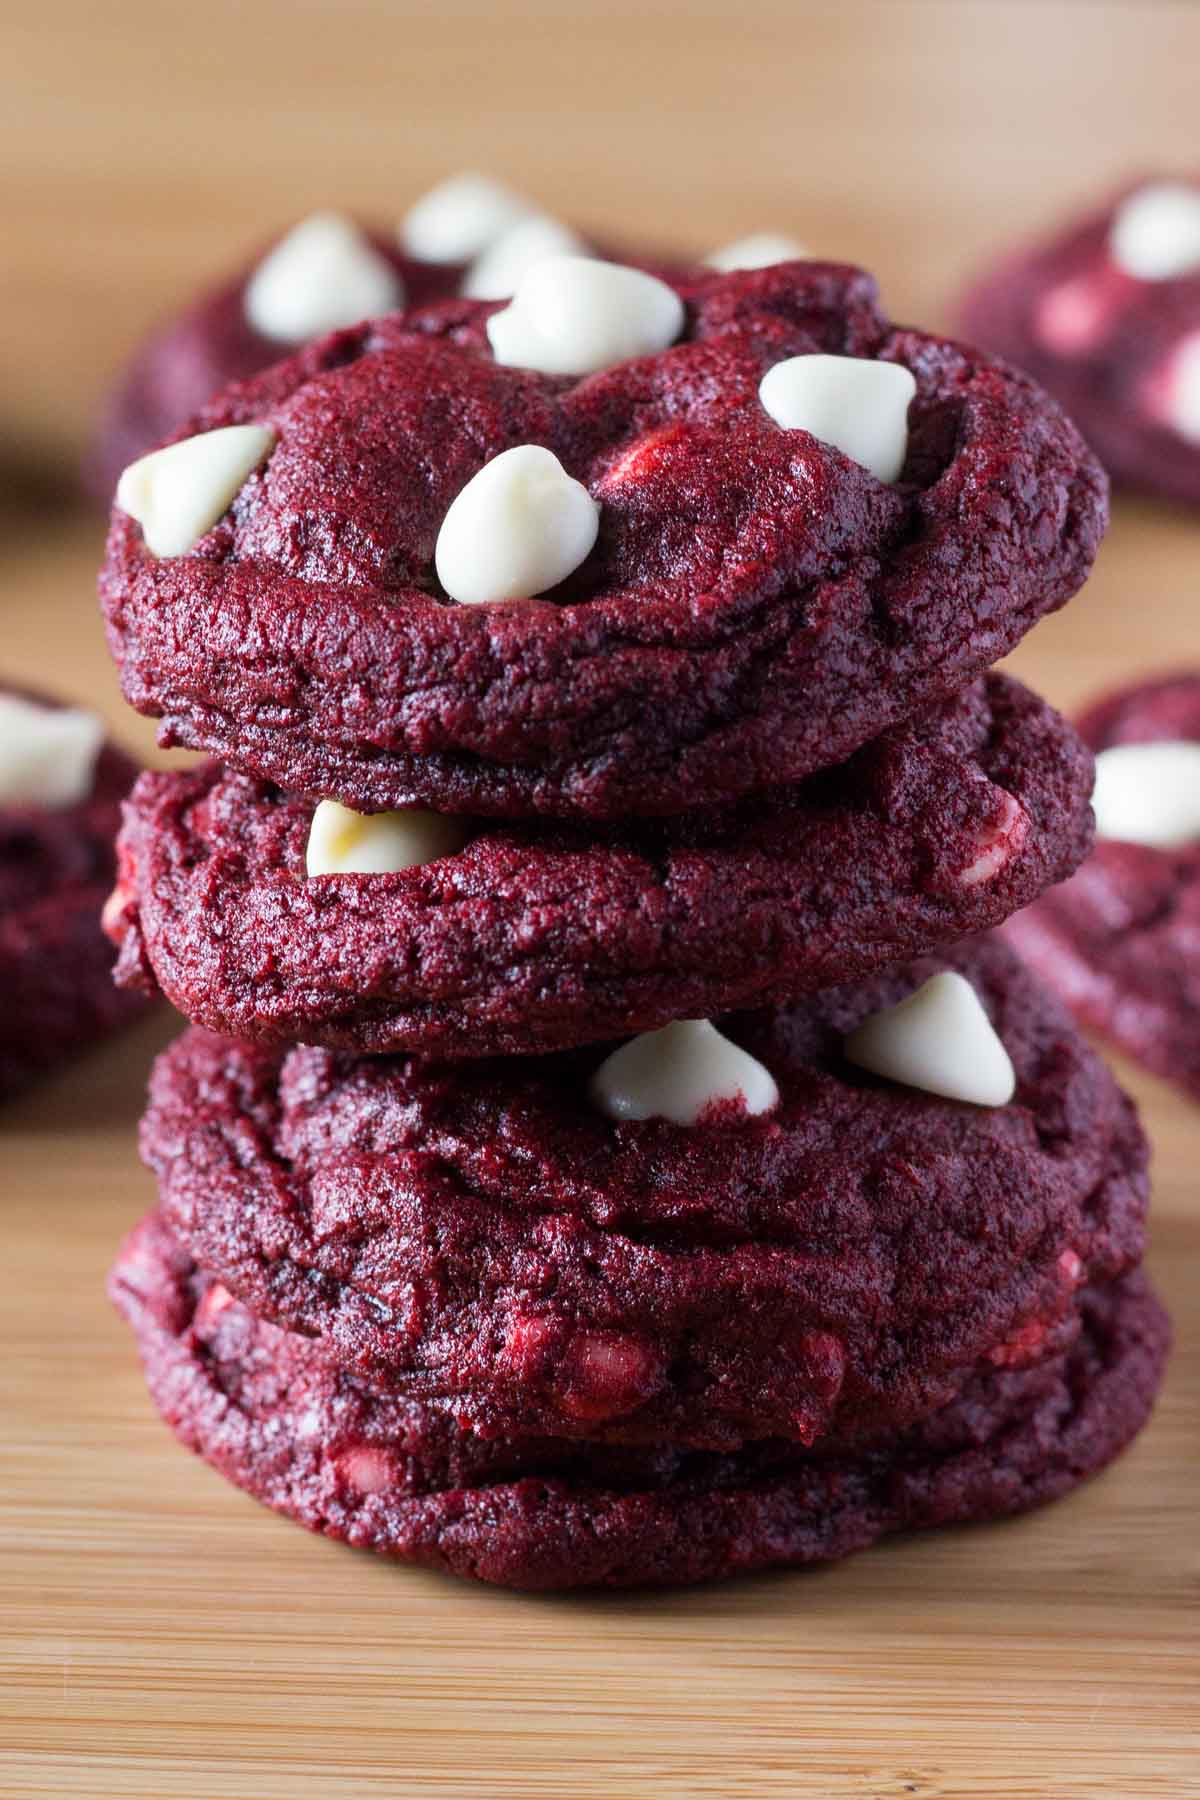 Soft, chewy Red Velvet Chocolate Chip Cookies. With a delicate hint of cocoa & oozing with melted chocolate chips - they're perfectly festive!